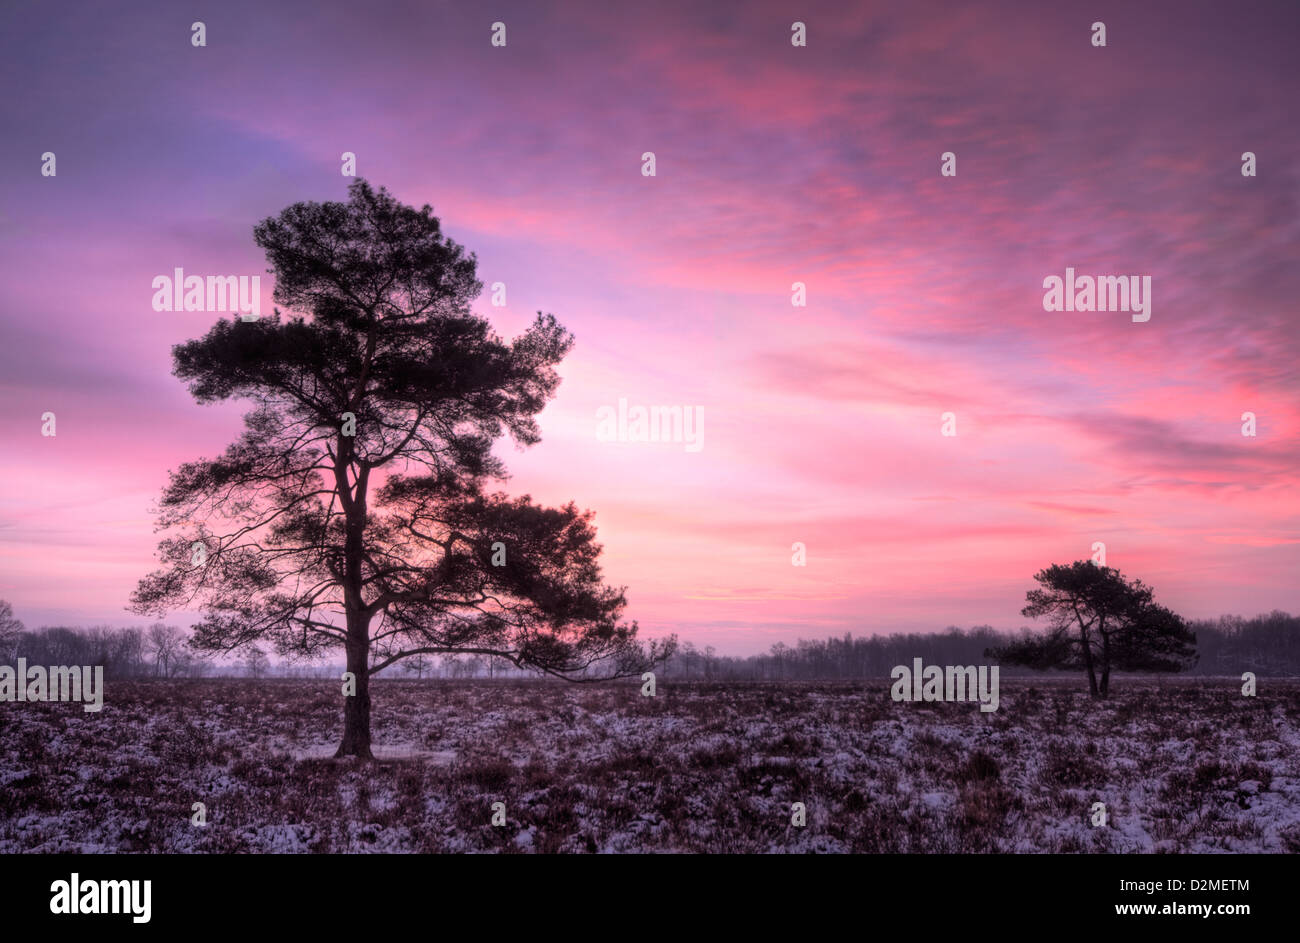 Pine trees on heath in winter at sunrise under a pink sky Stock Photo